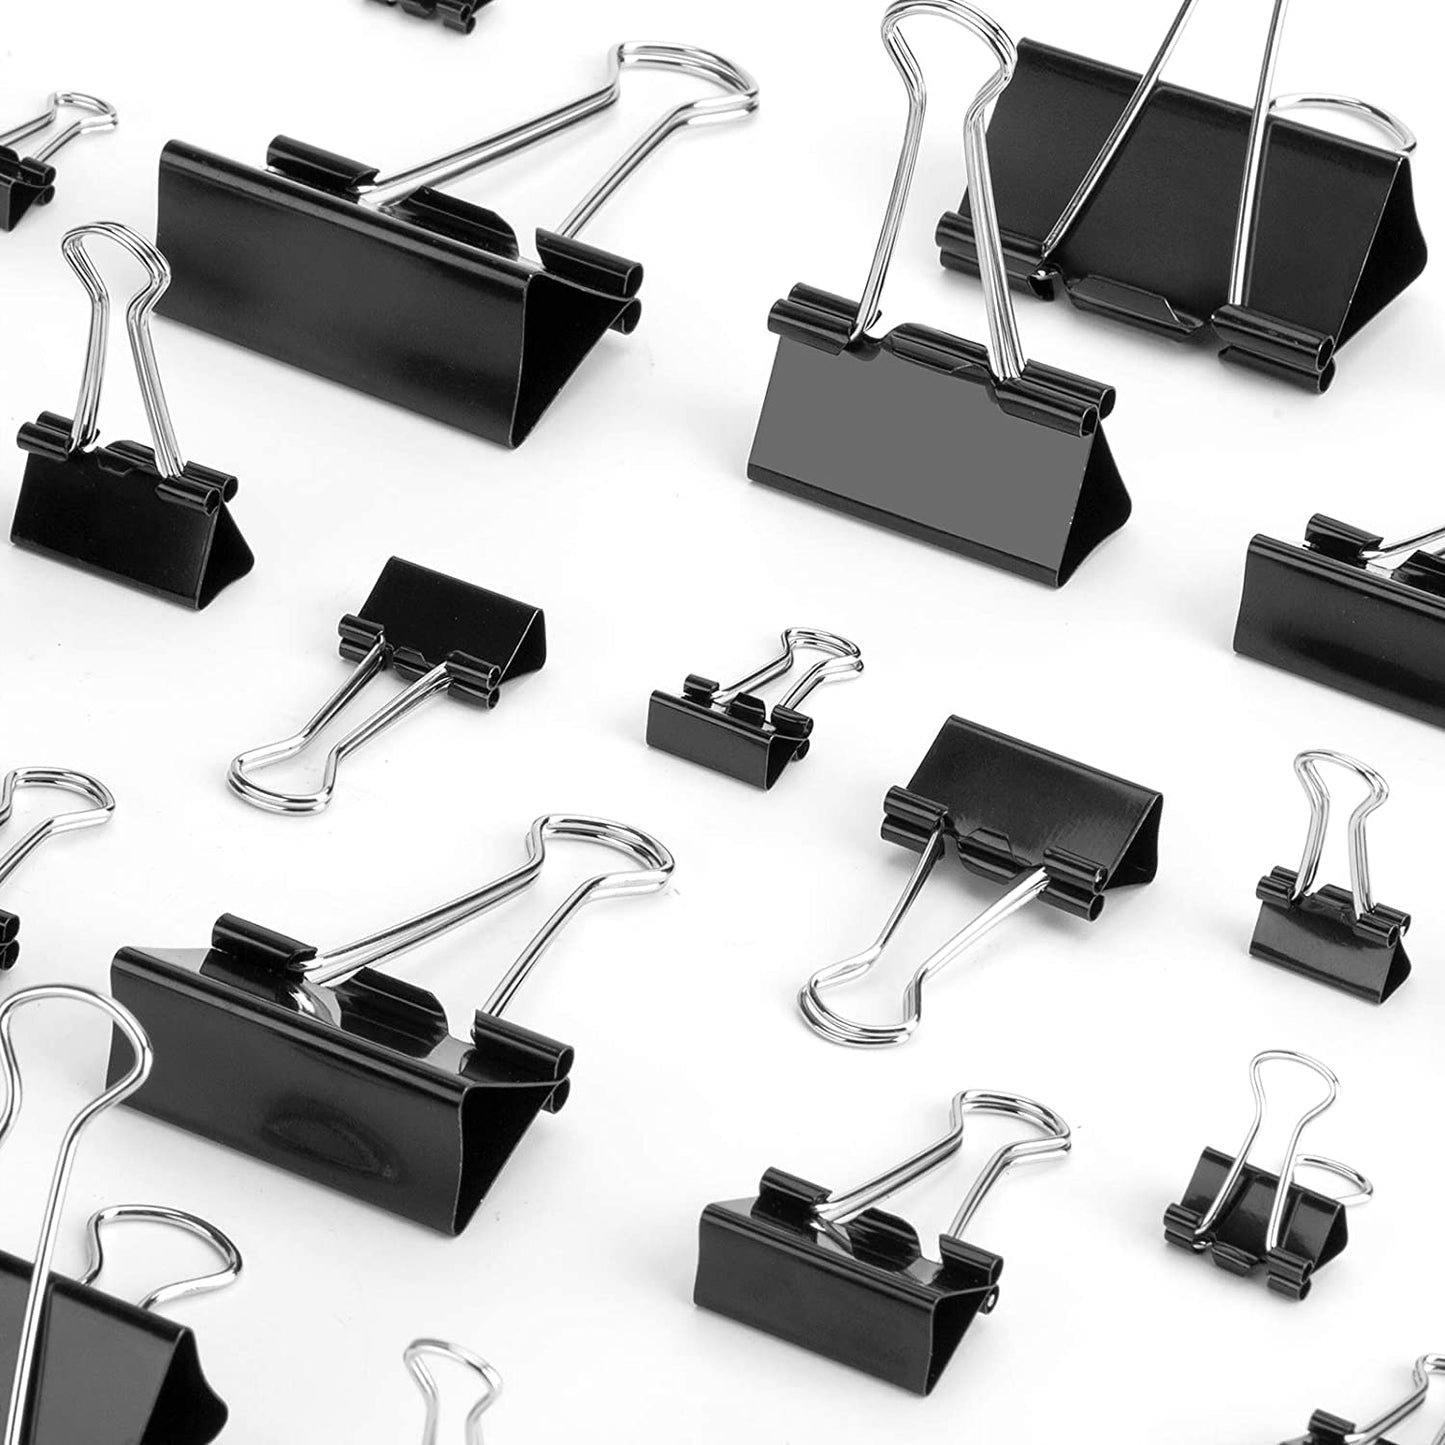 Ondesk Essentials Paper Binder Clips Assorted 84Pieces (24Pieces of 15MM, 24Pieces of 19MM, 24Pieces of 25MM and 12Pieces of 32MM) Black for Holding Loose Papers for School, Office & Home Use